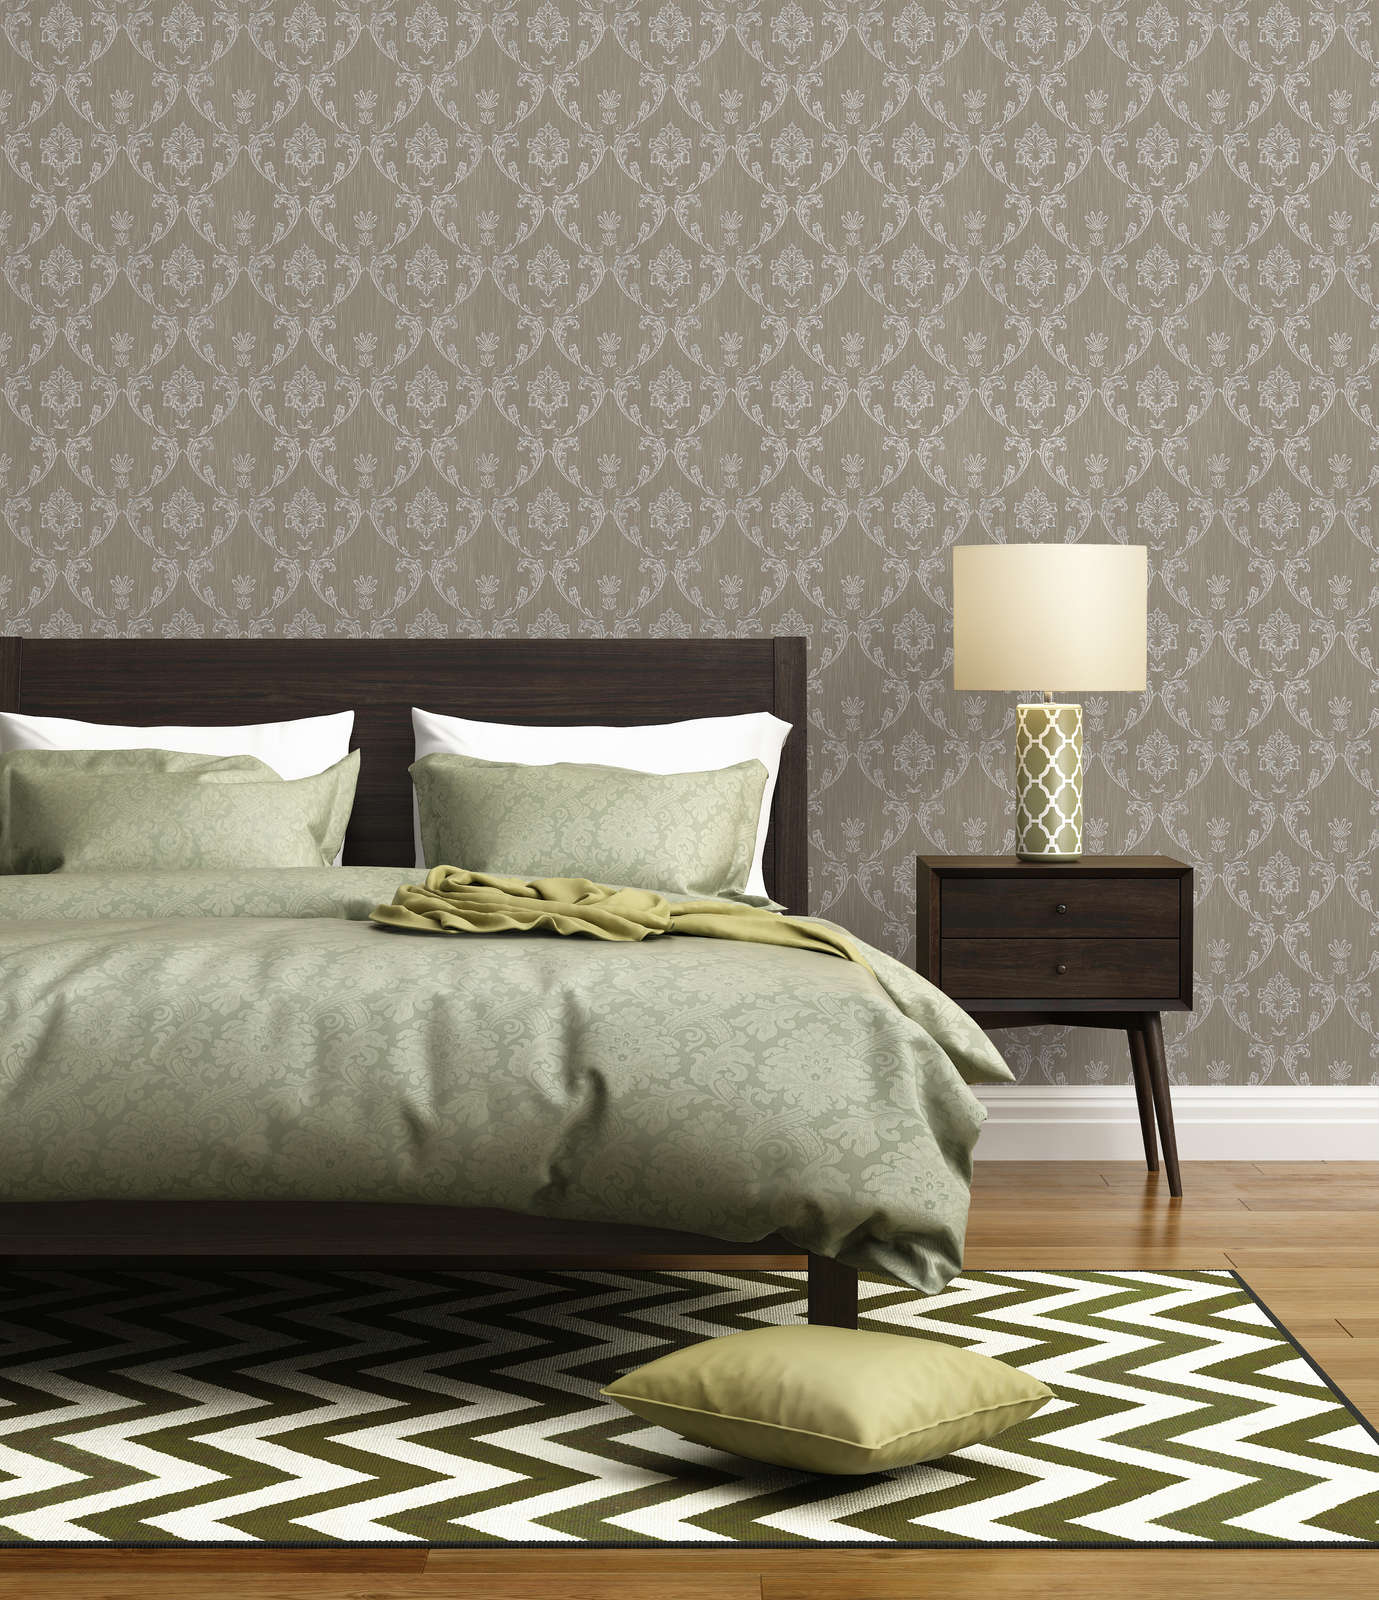             Ornamental wallpaper with floral elements in silver - silver, brown
        